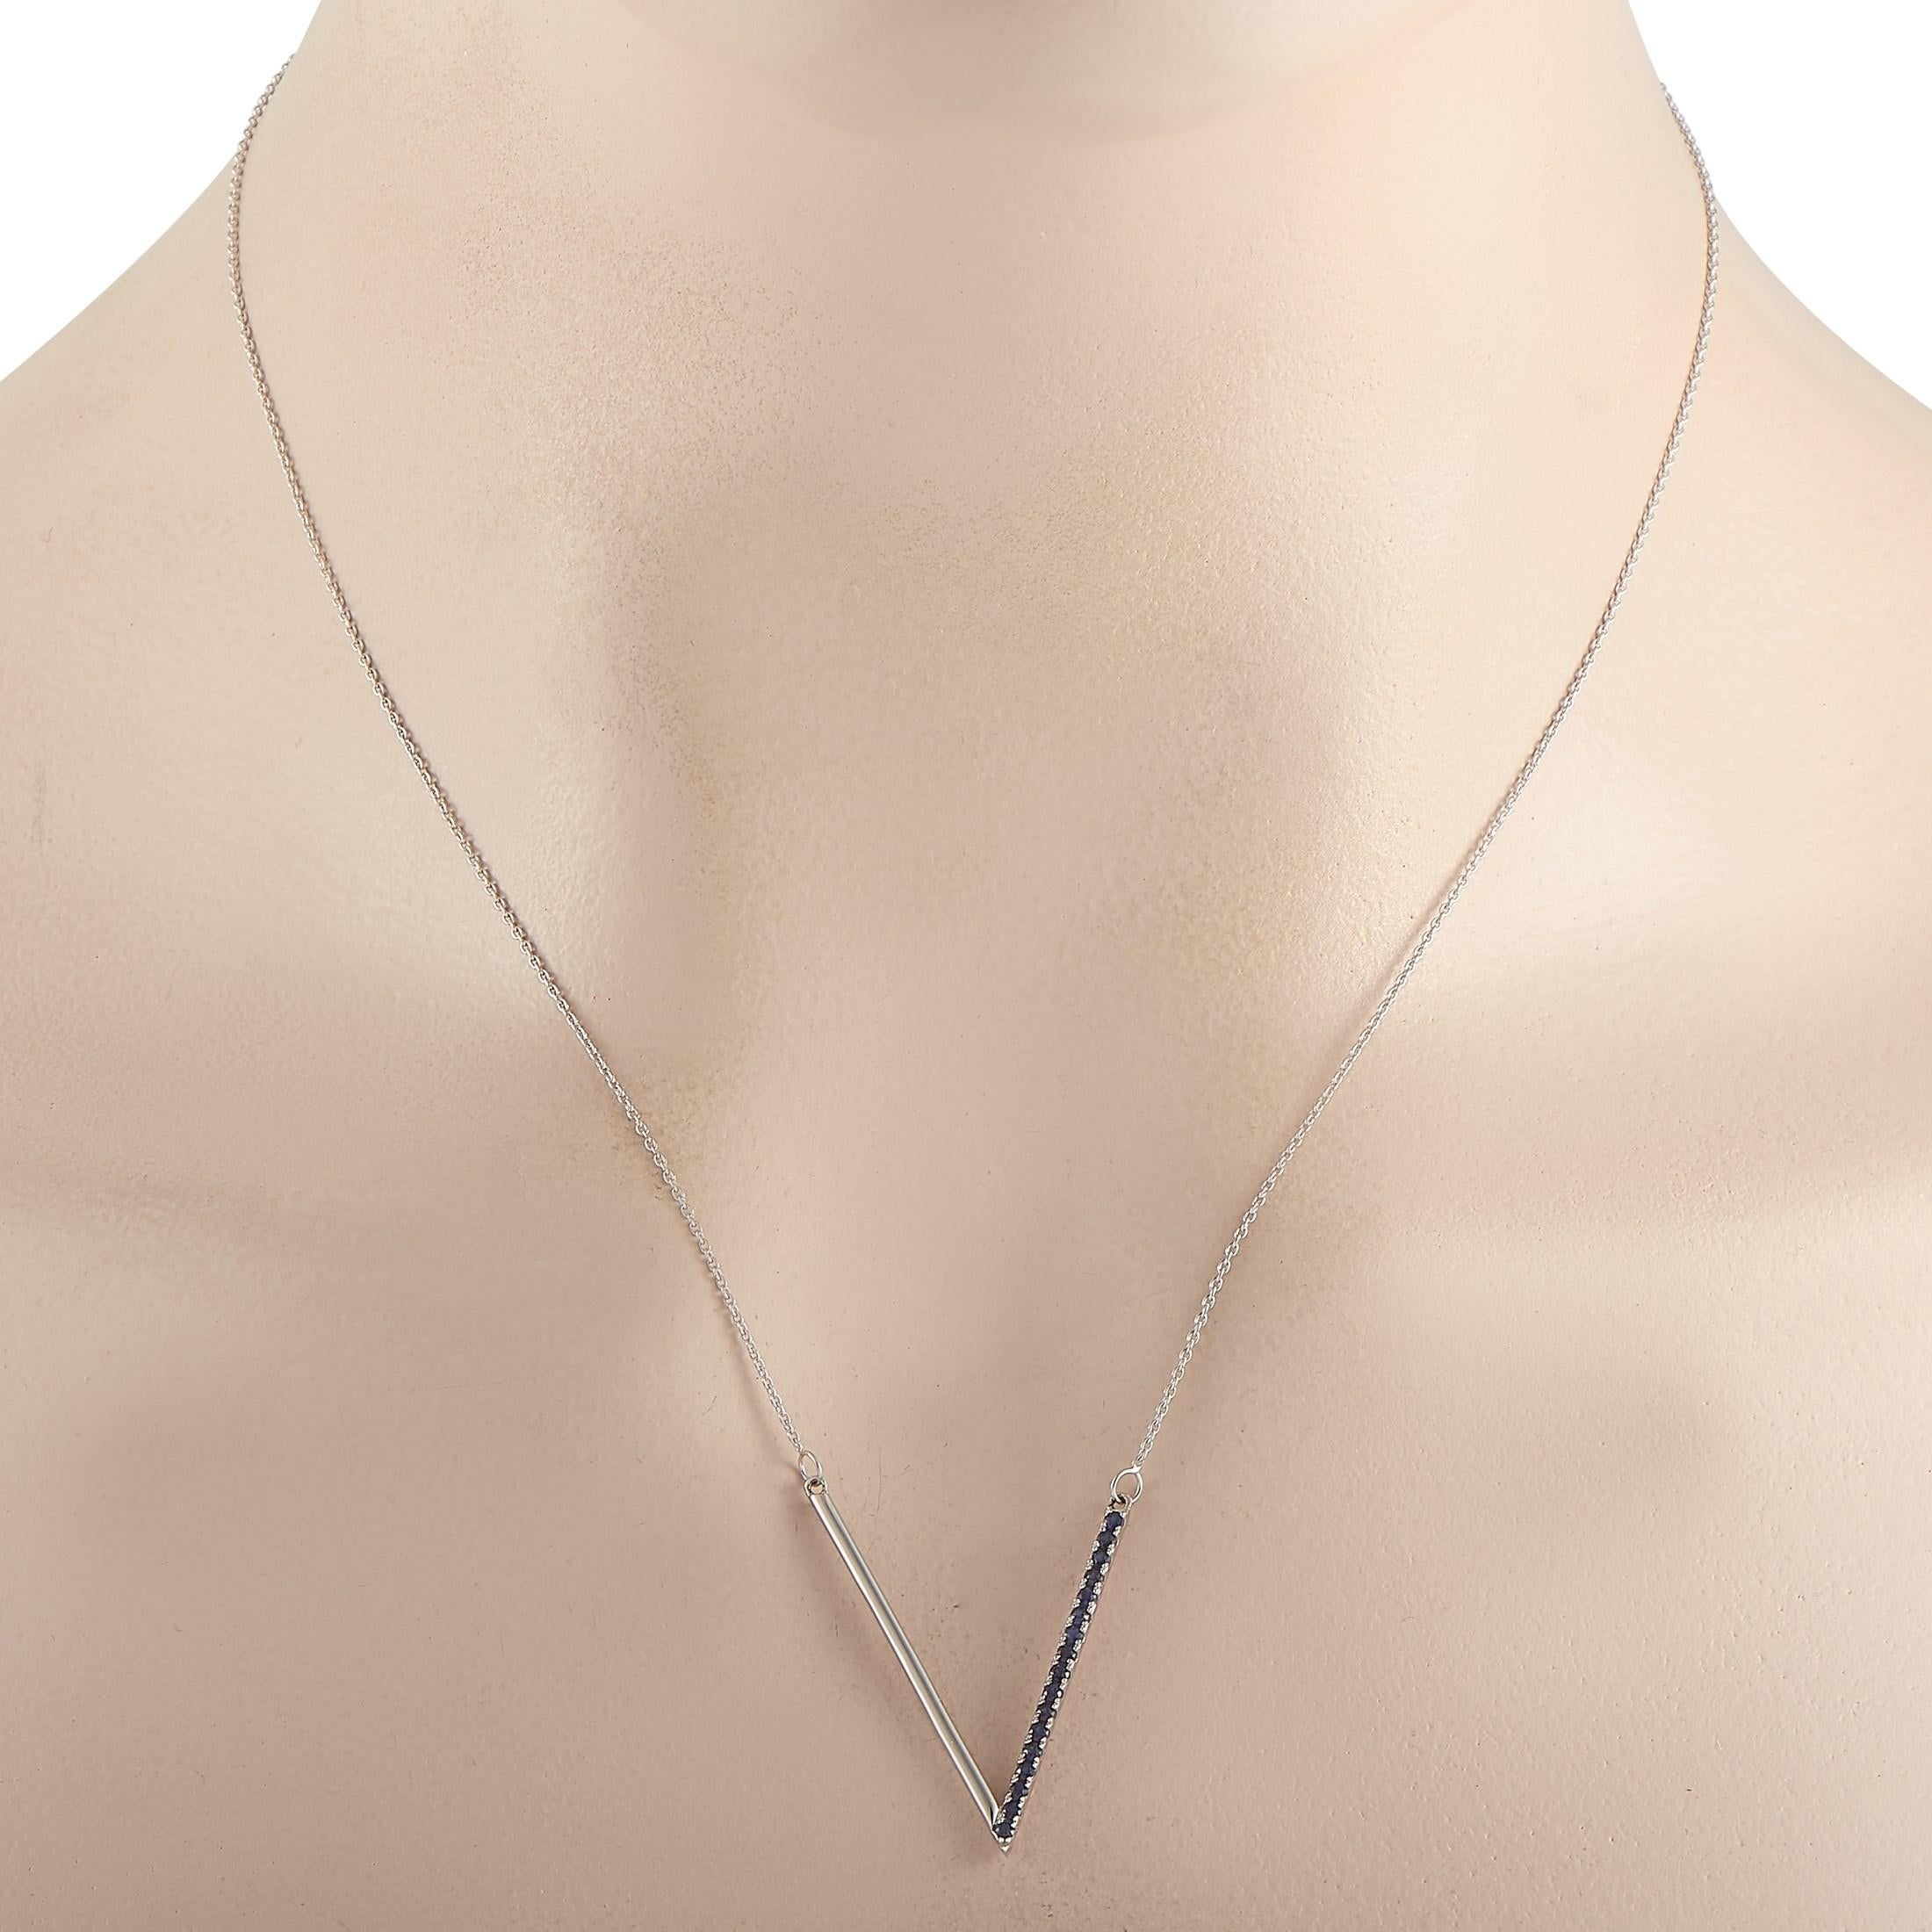 This unique LB Exclusive 14K White Gold 0.29 ct Sapphire V Pendant Necklace is a subtle statement piece that includes a delicate 14K White Gold chain that is 17 inches in length and features a lobster clasp. The necklace includes a matching 14K